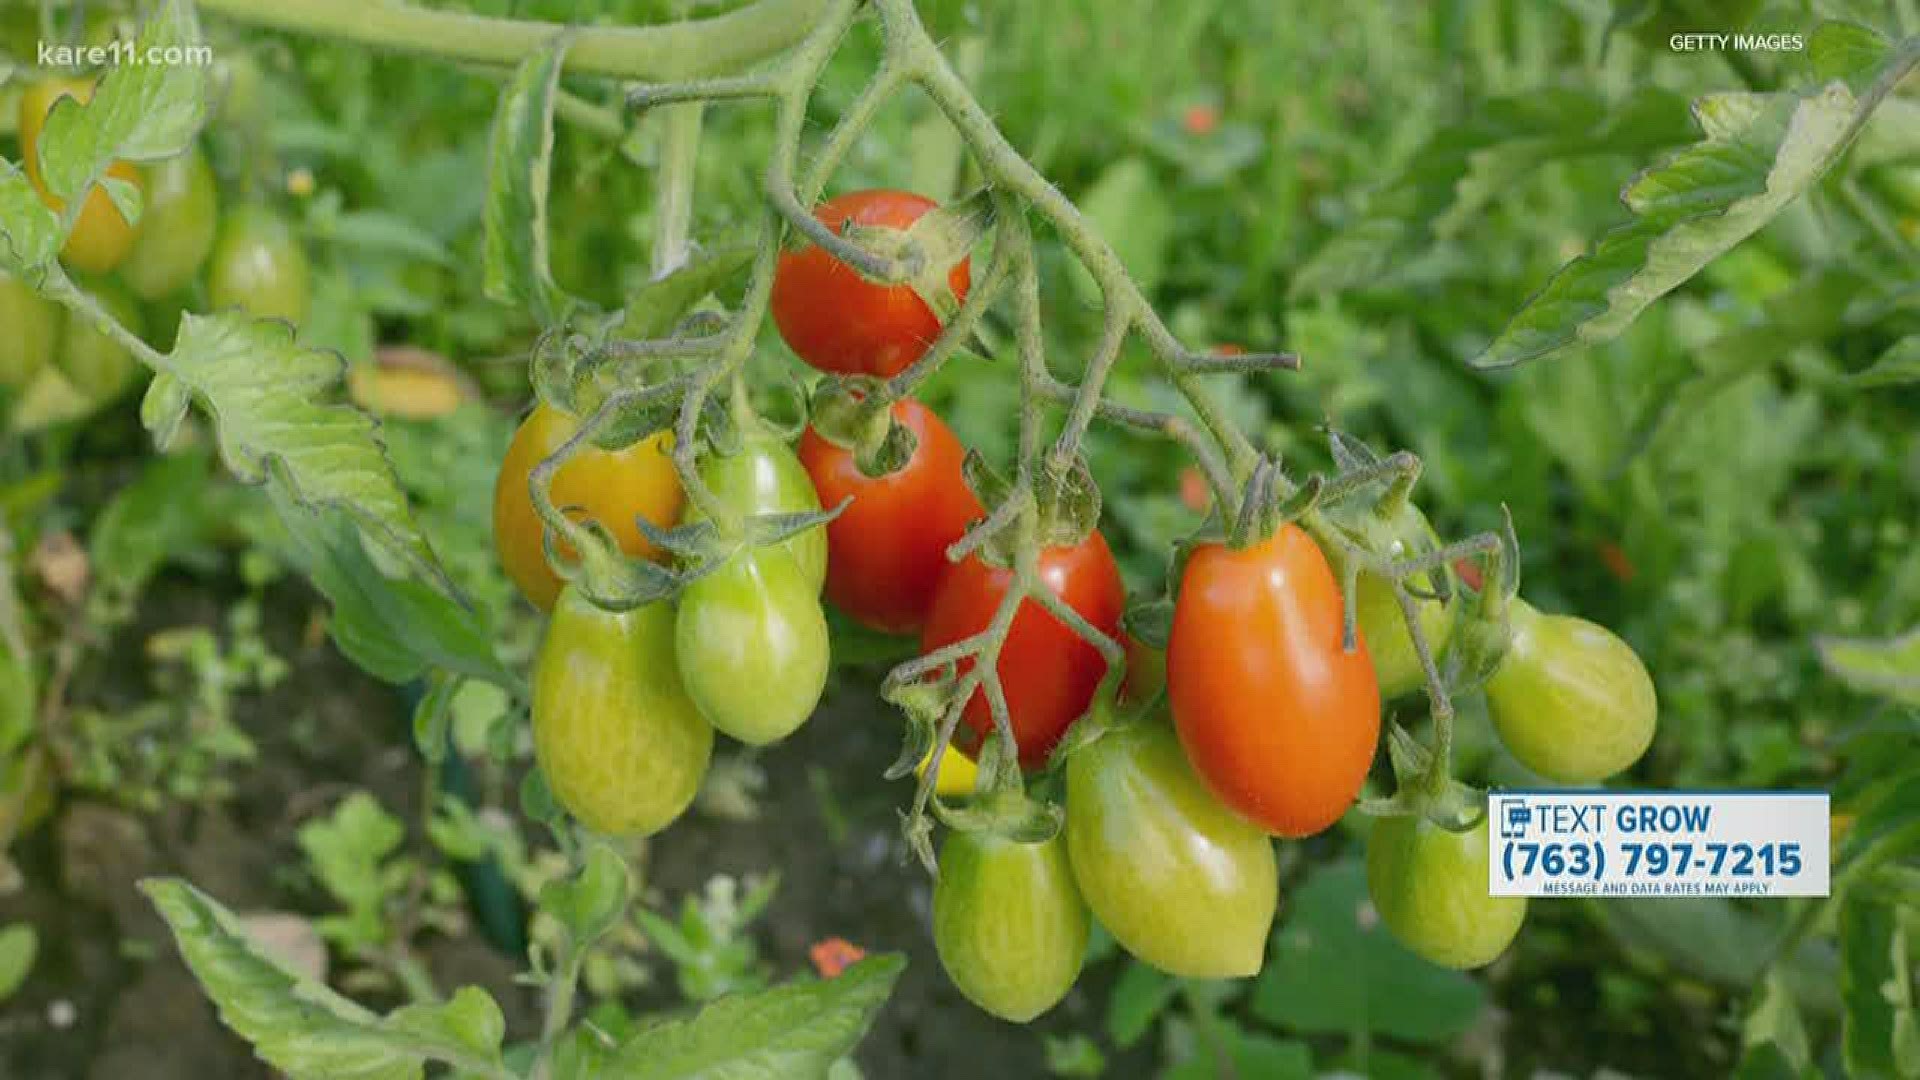 So many of us are growing tomatoes this year, but it's not the easiest of crops. Here are a few things to keep in mind as you plant.